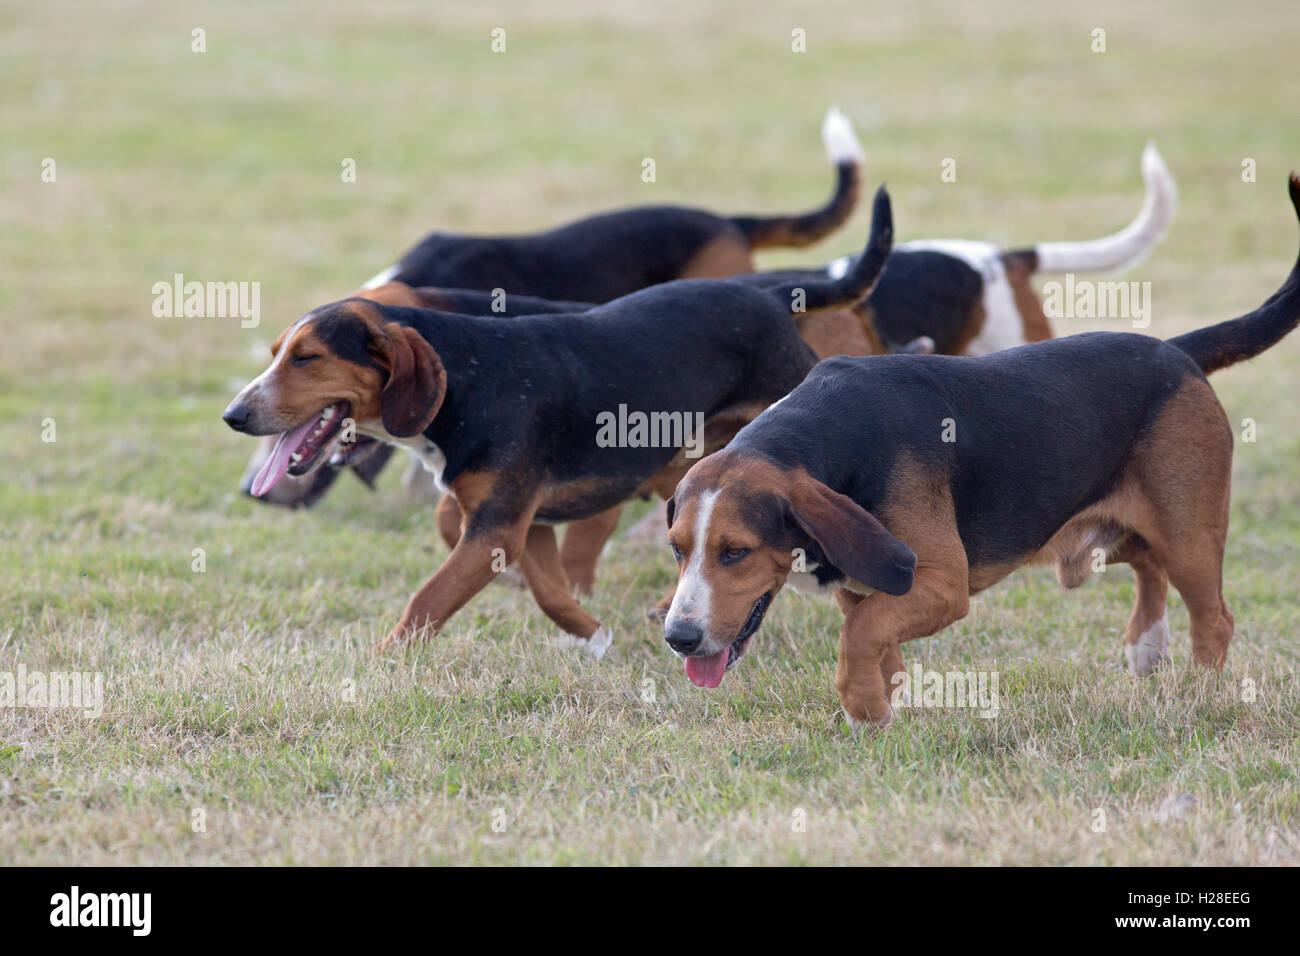 Basset Hounds (Canis lupus familiaris). Pack animals bred to hunt Brown Hares (Lepus europaeus) in the field. Stock Photo